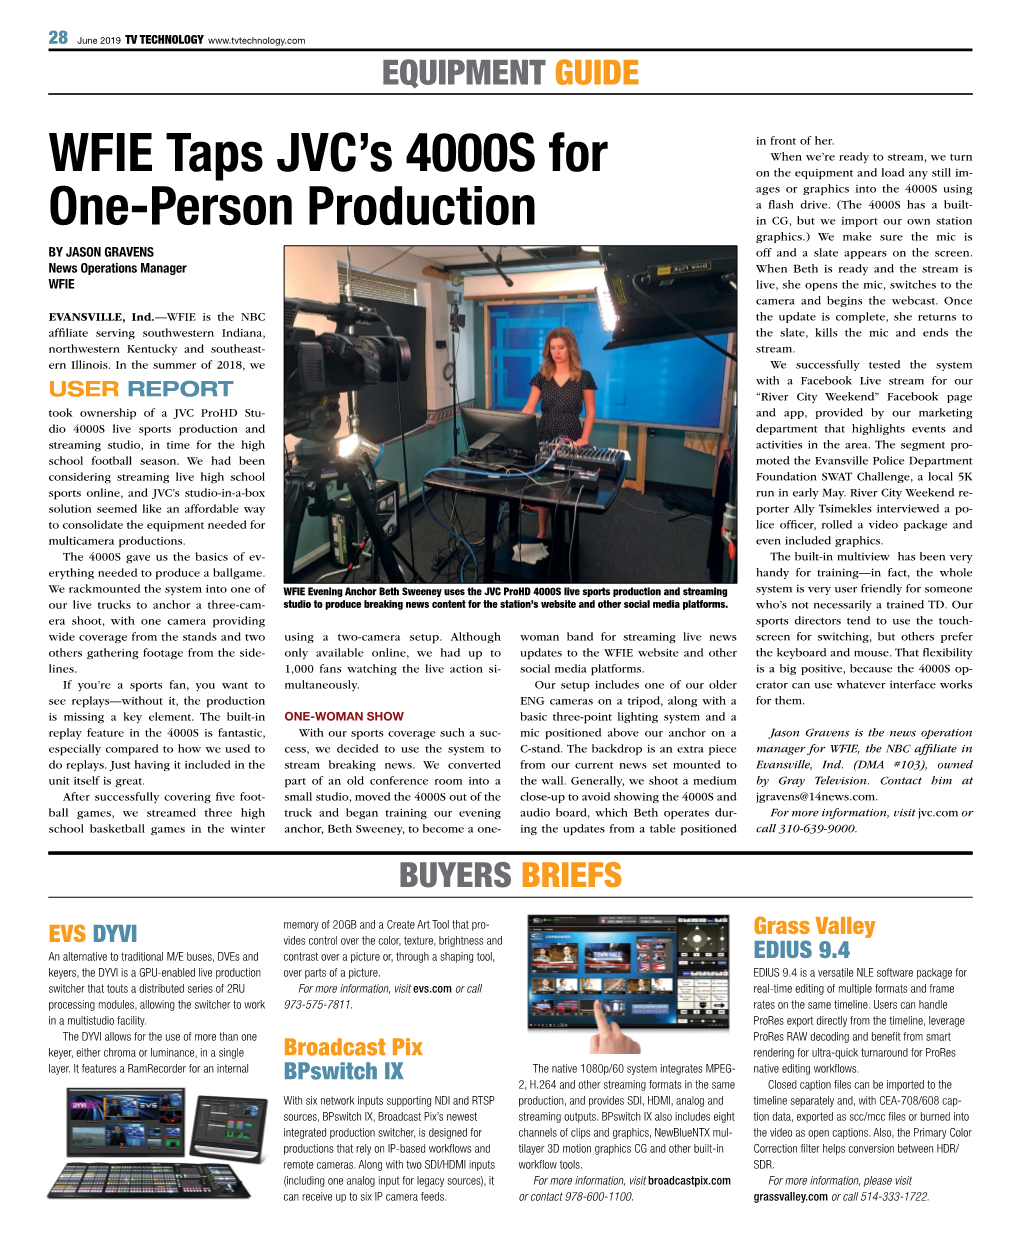 WFIE Taps JVC's 4000S for One-Person Production